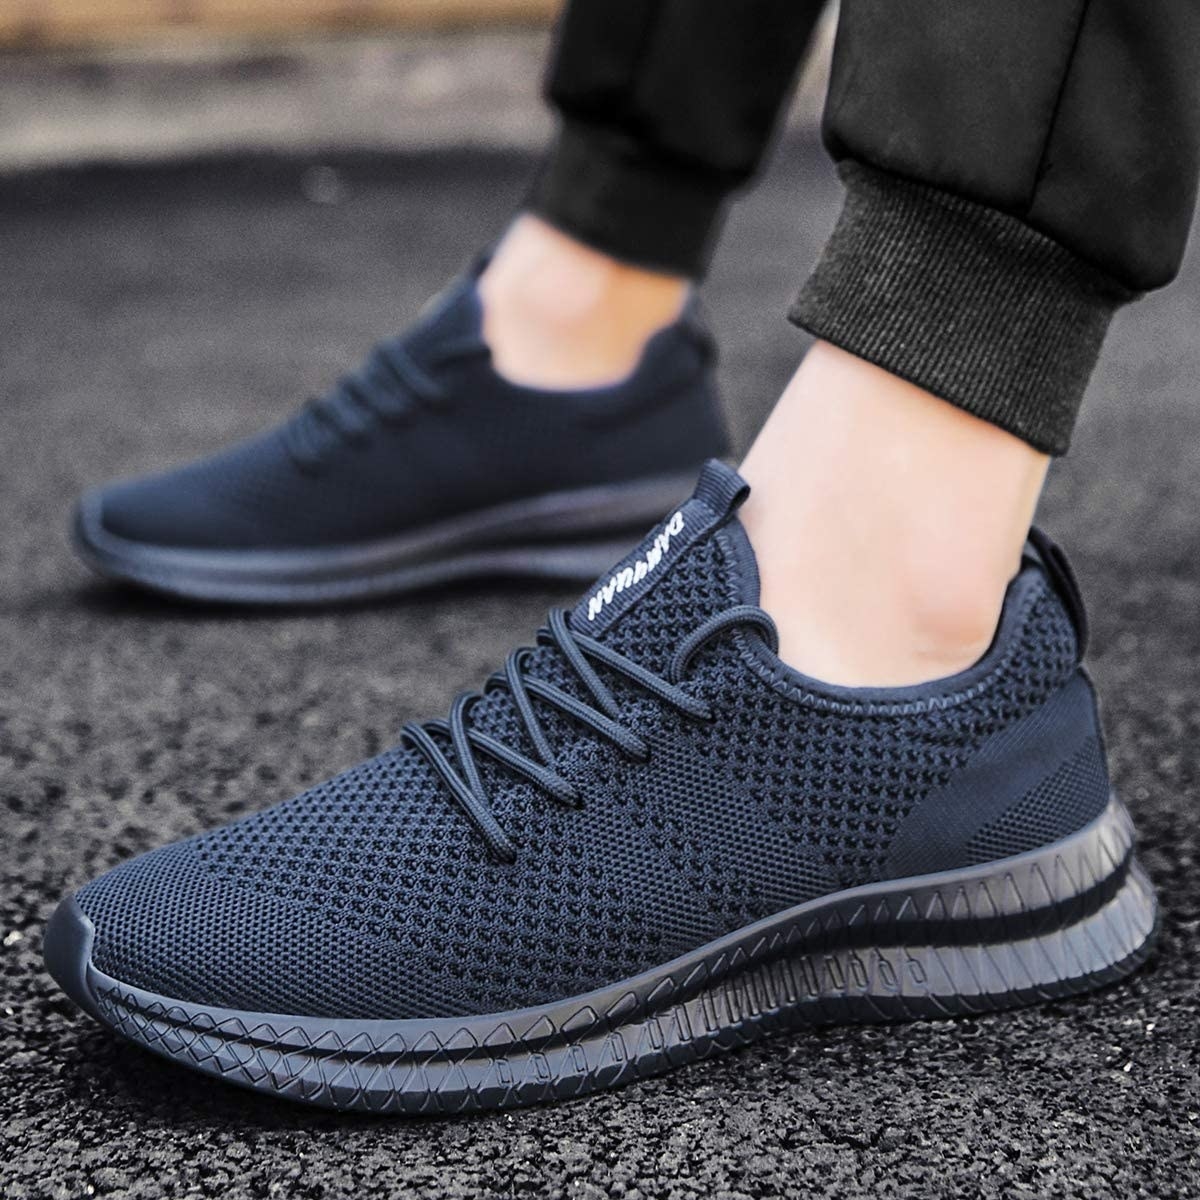 20 Amazon Running Sneakers Popular For Their Comfort